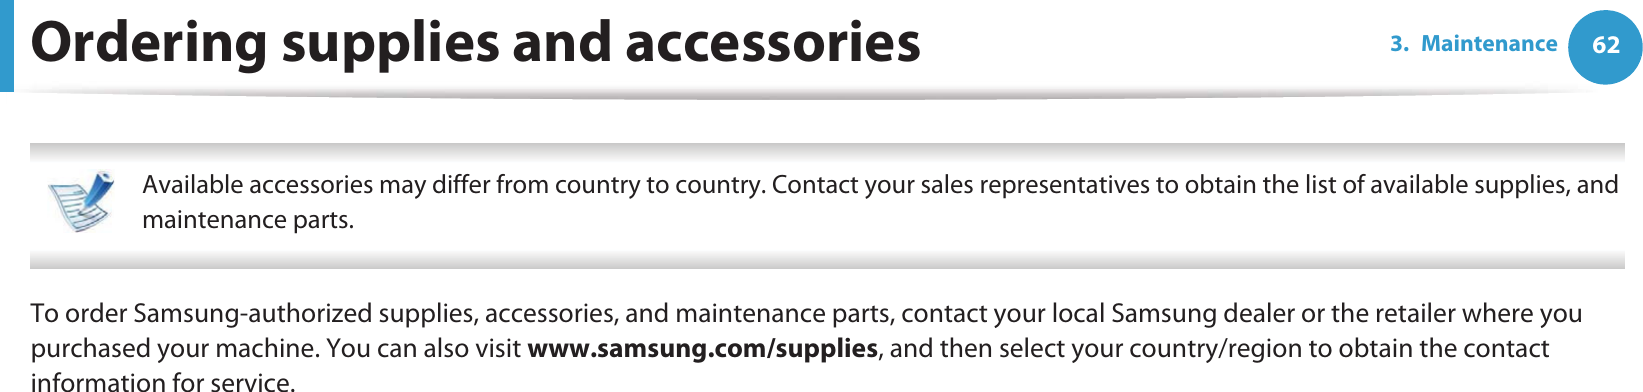 623. MaintenanceOrdering supplies and accessories Available accessories may differ from country to country. Contact your sales representatives to obtain the list of available supplies, and maintenance parts. To order Samsung-authorized supplies, accessories, and maintenance parts, contact your local Samsung dealer or the retailer where you purchased your machine. You can also visit www.samsung.com/supplies, and then select your country/region to obtain the contact information for service.